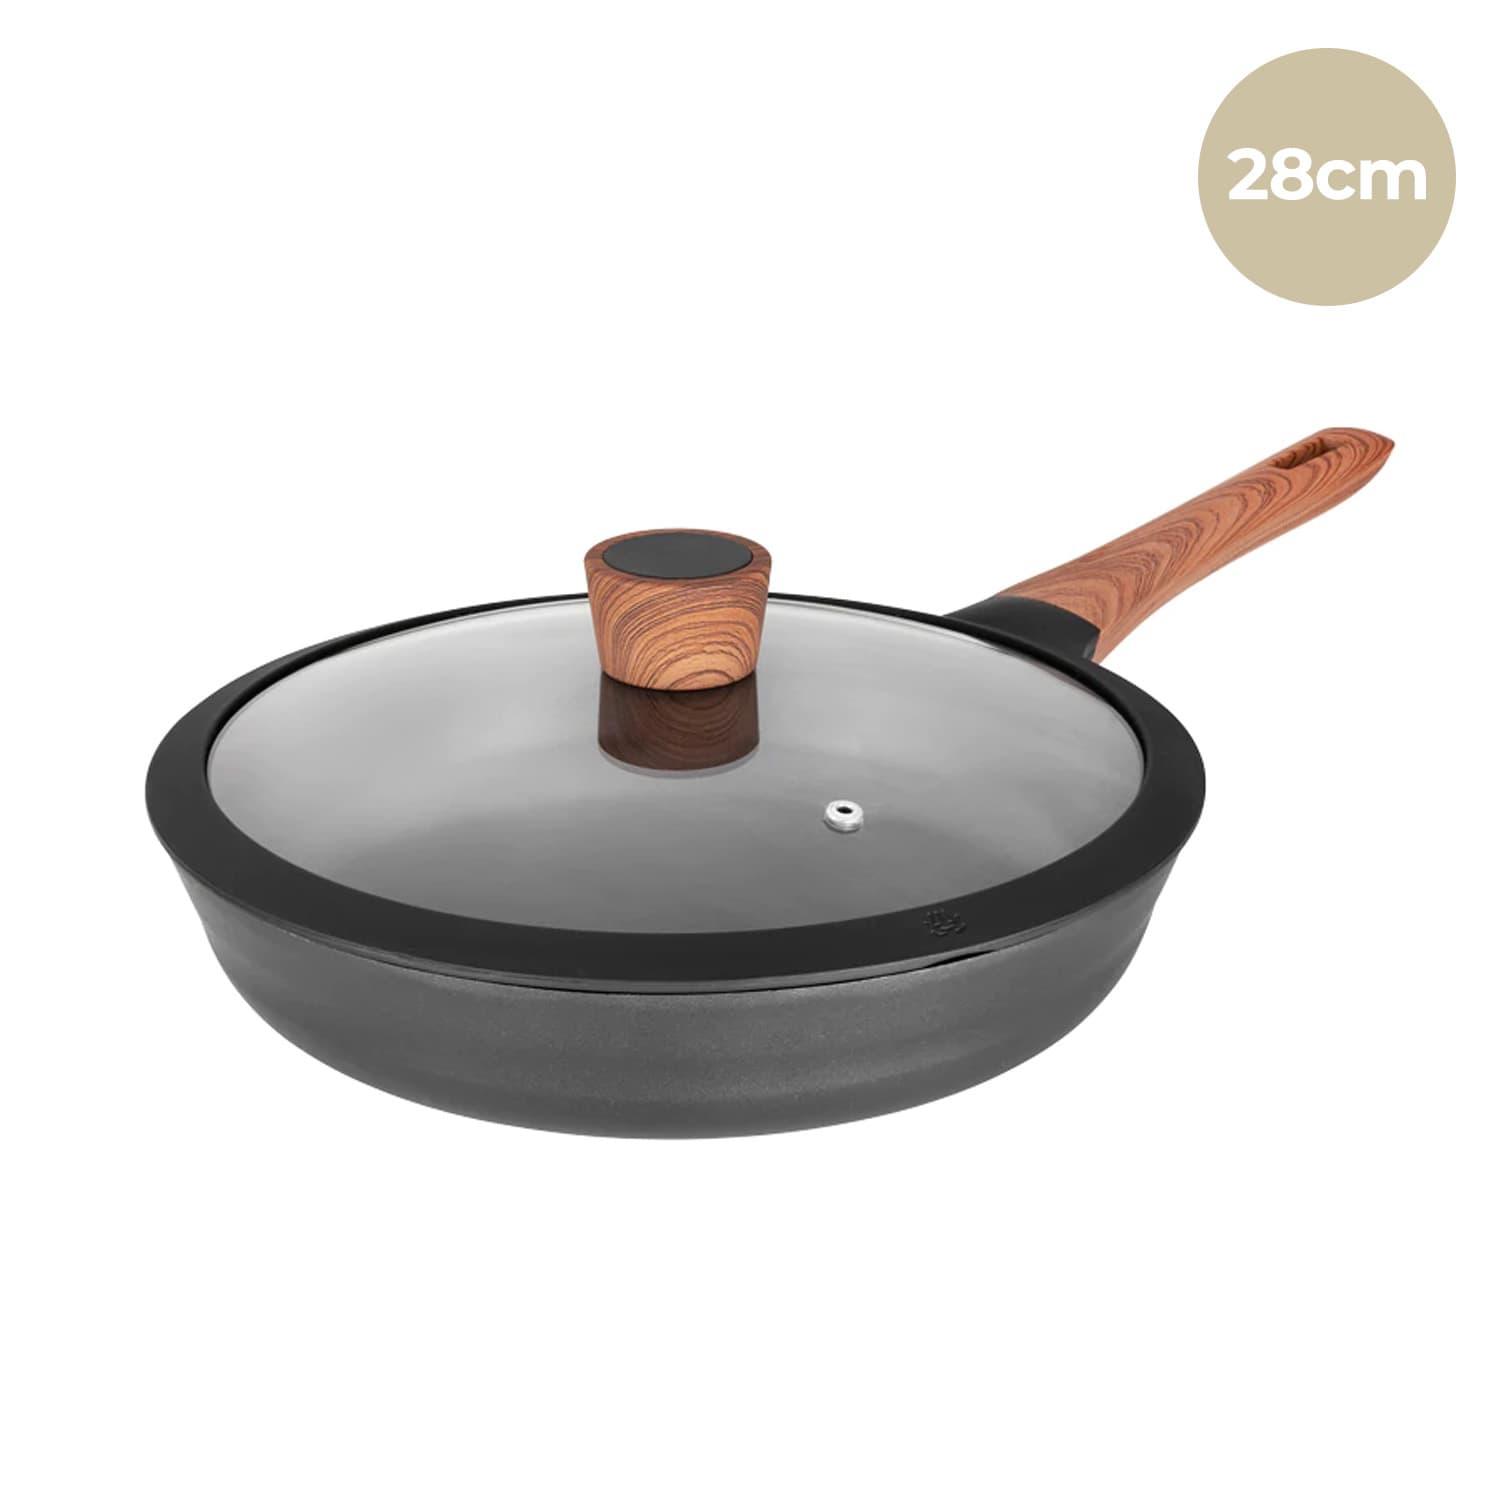 Diamond Earth® Frying Pan With Glass Lid - 28cm Cookware Kleva Range - Everyday Innovations   